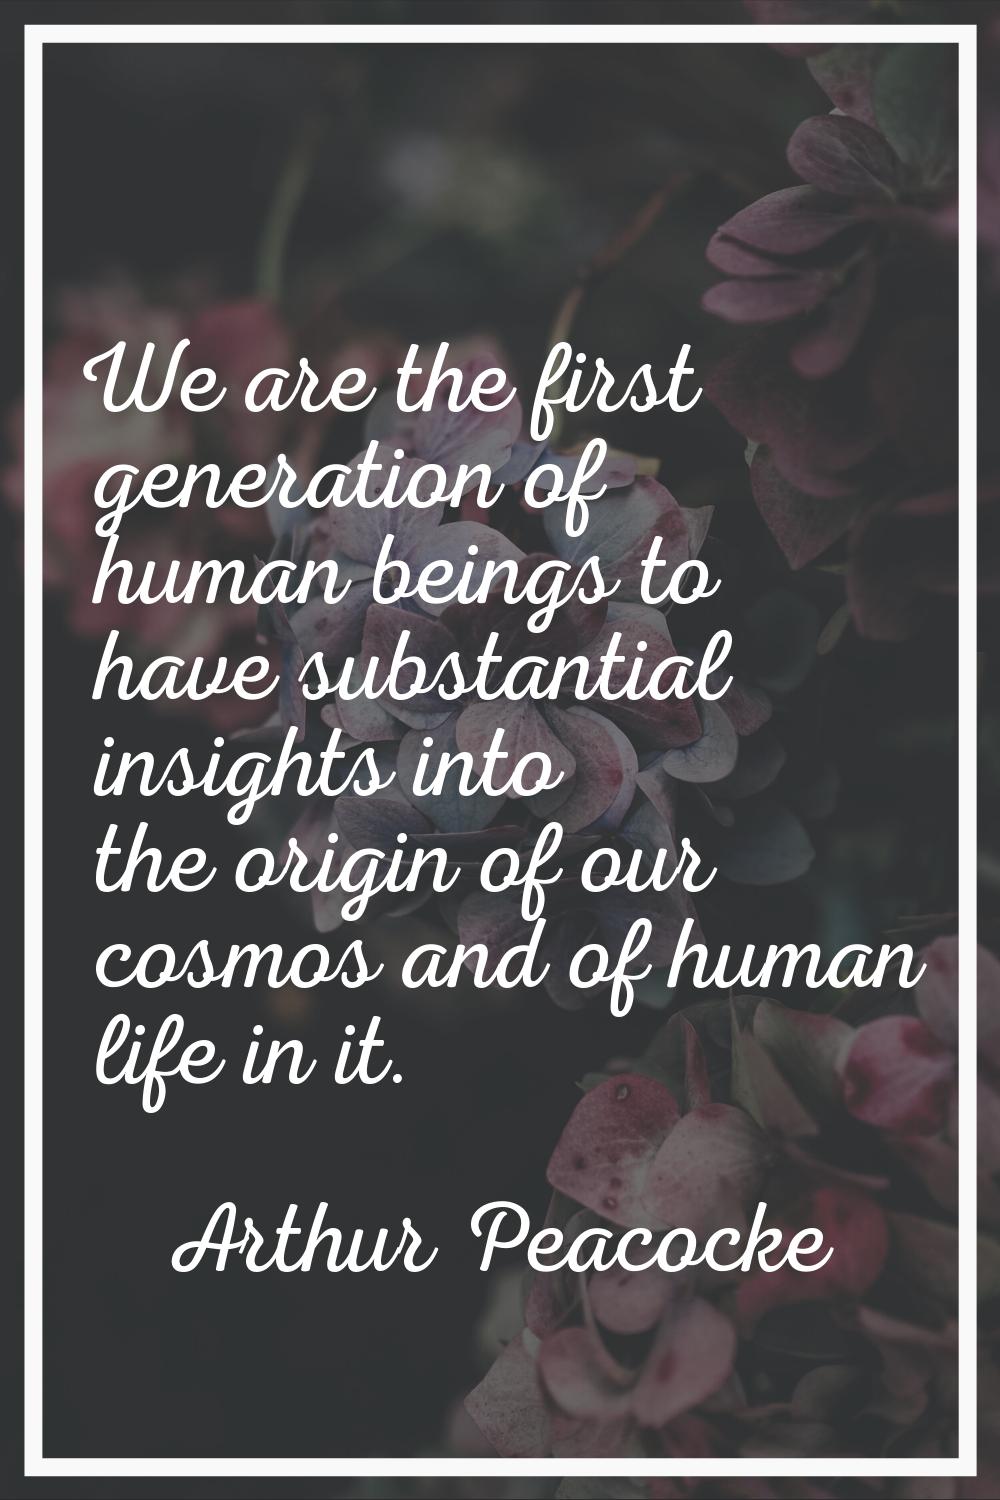 We are the first generation of human beings to have substantial insights into the origin of our cos